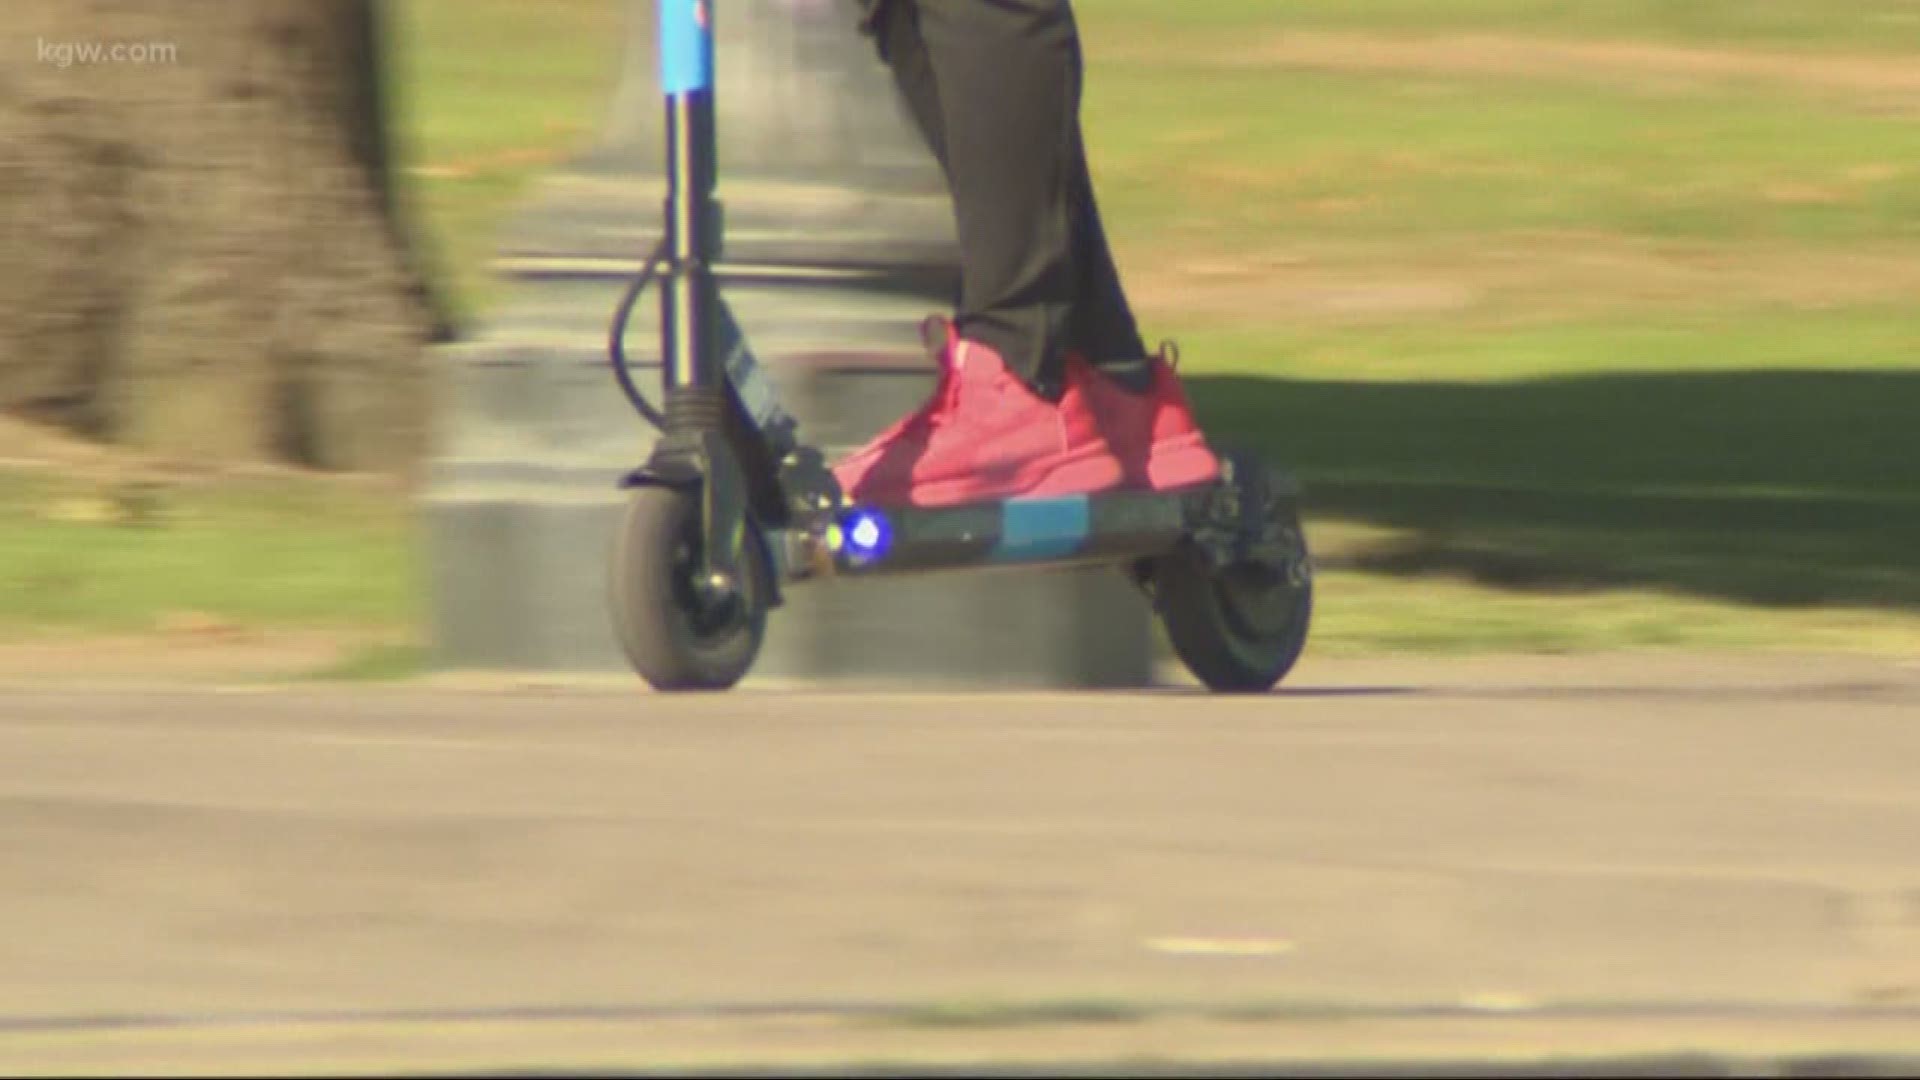 An experiment to allow citizens to rent e-scooters and ride them pretty much anywhere is ending in Portland. It was wildly popular and also drew scorn over safety and aesthetic concerns.